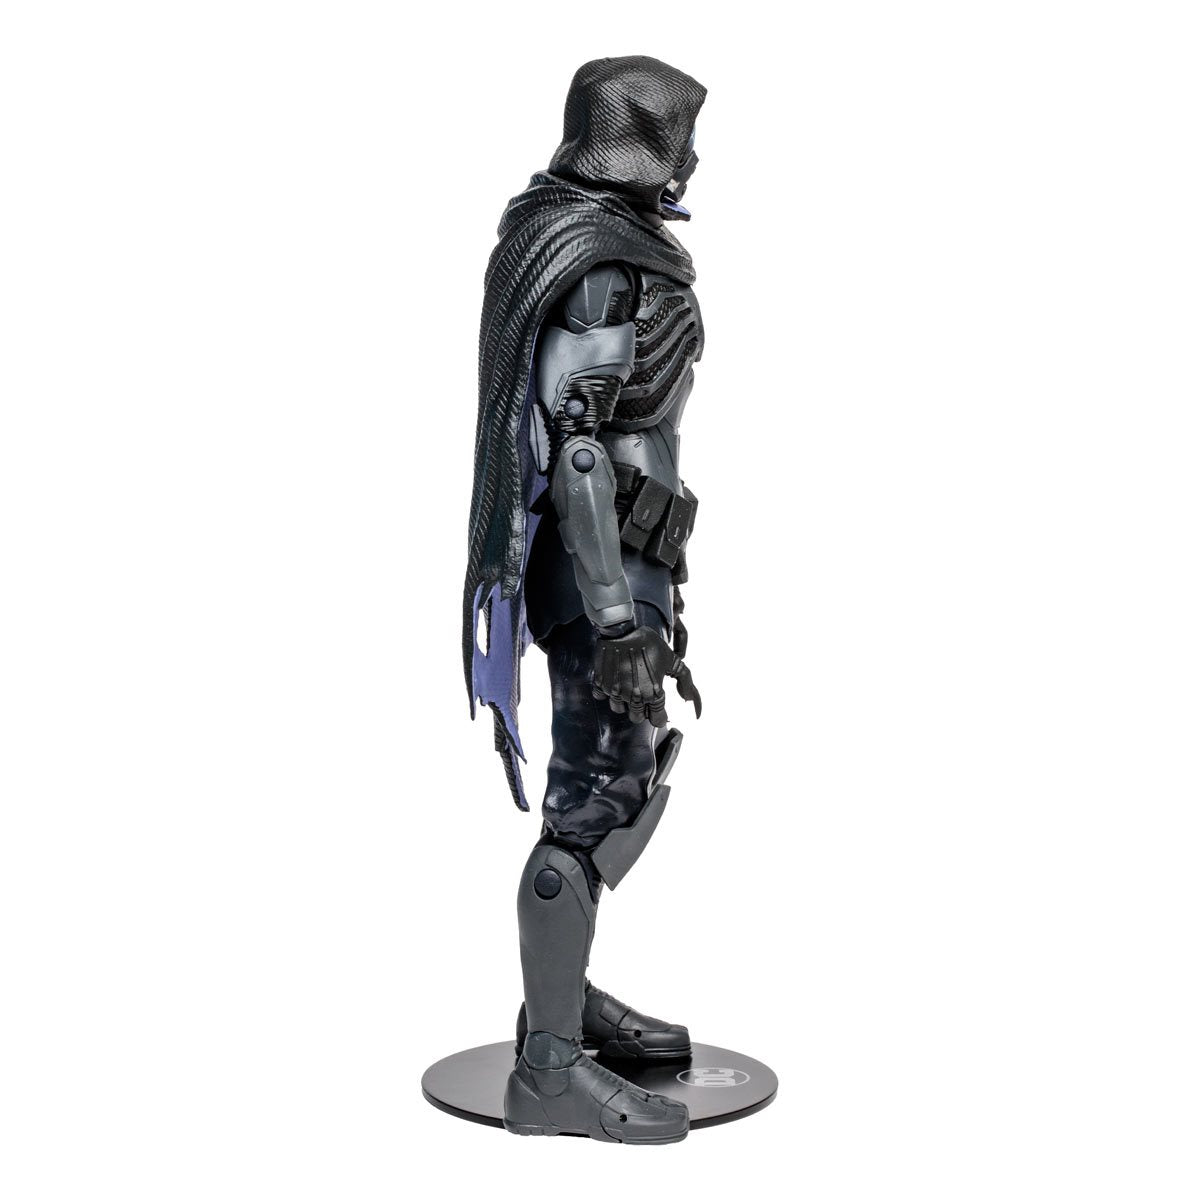 Abyss Batman vs. Abyss 7-Inch Scale Action Figur side pose - Heretoserveyou